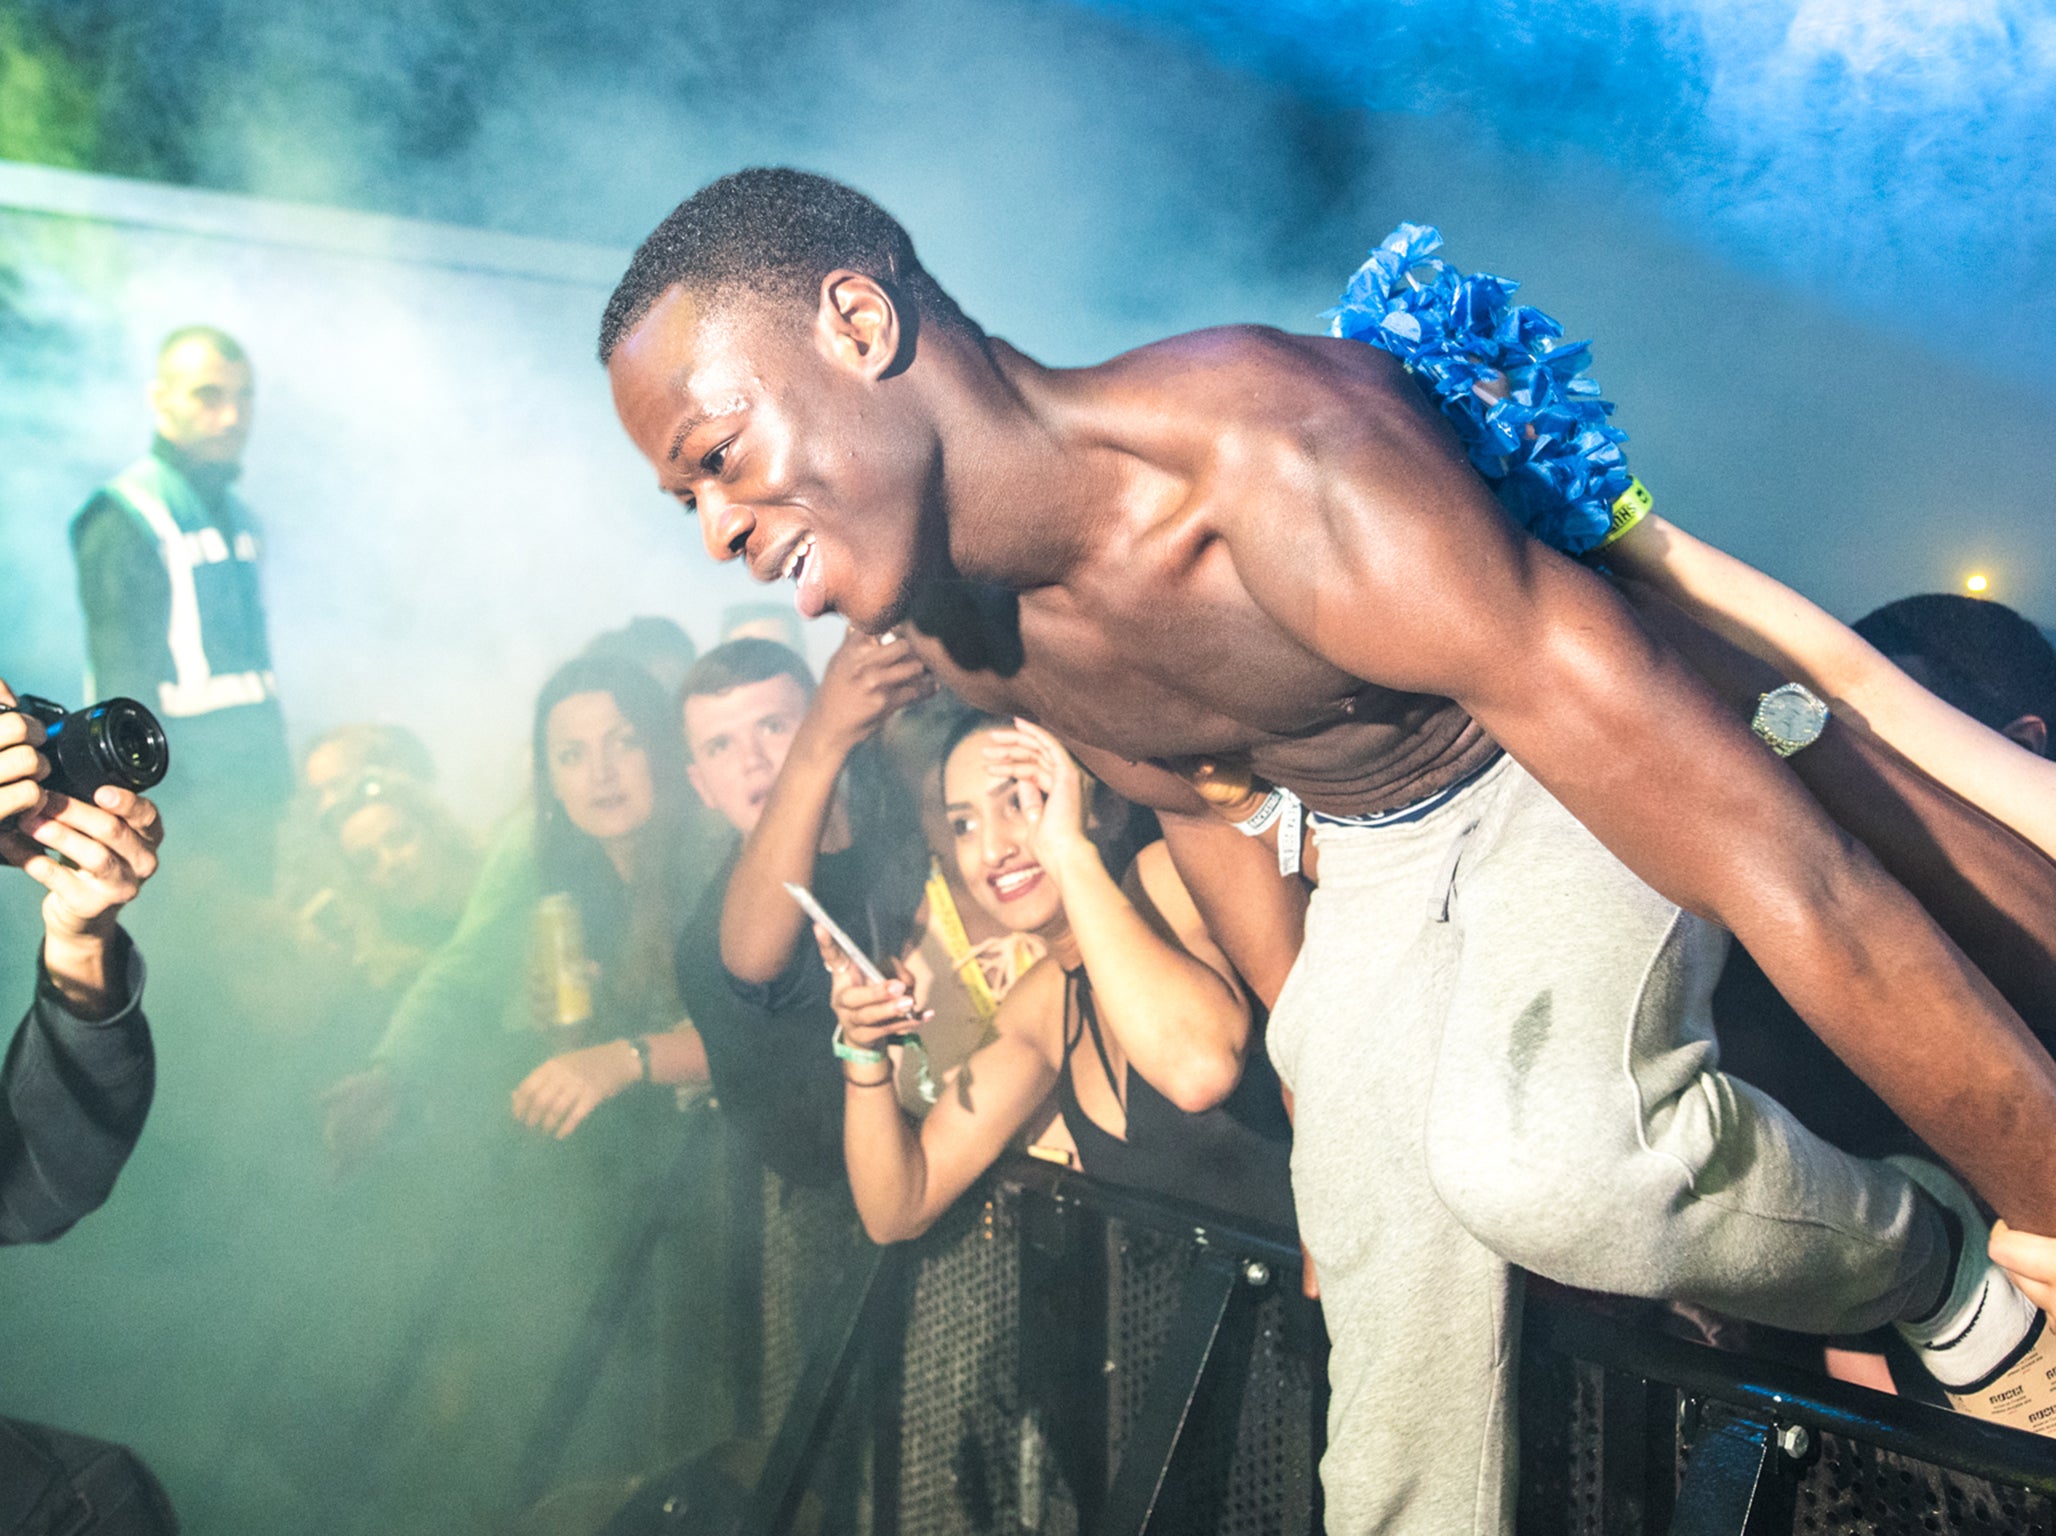 J Hus re-emerges from the crowd